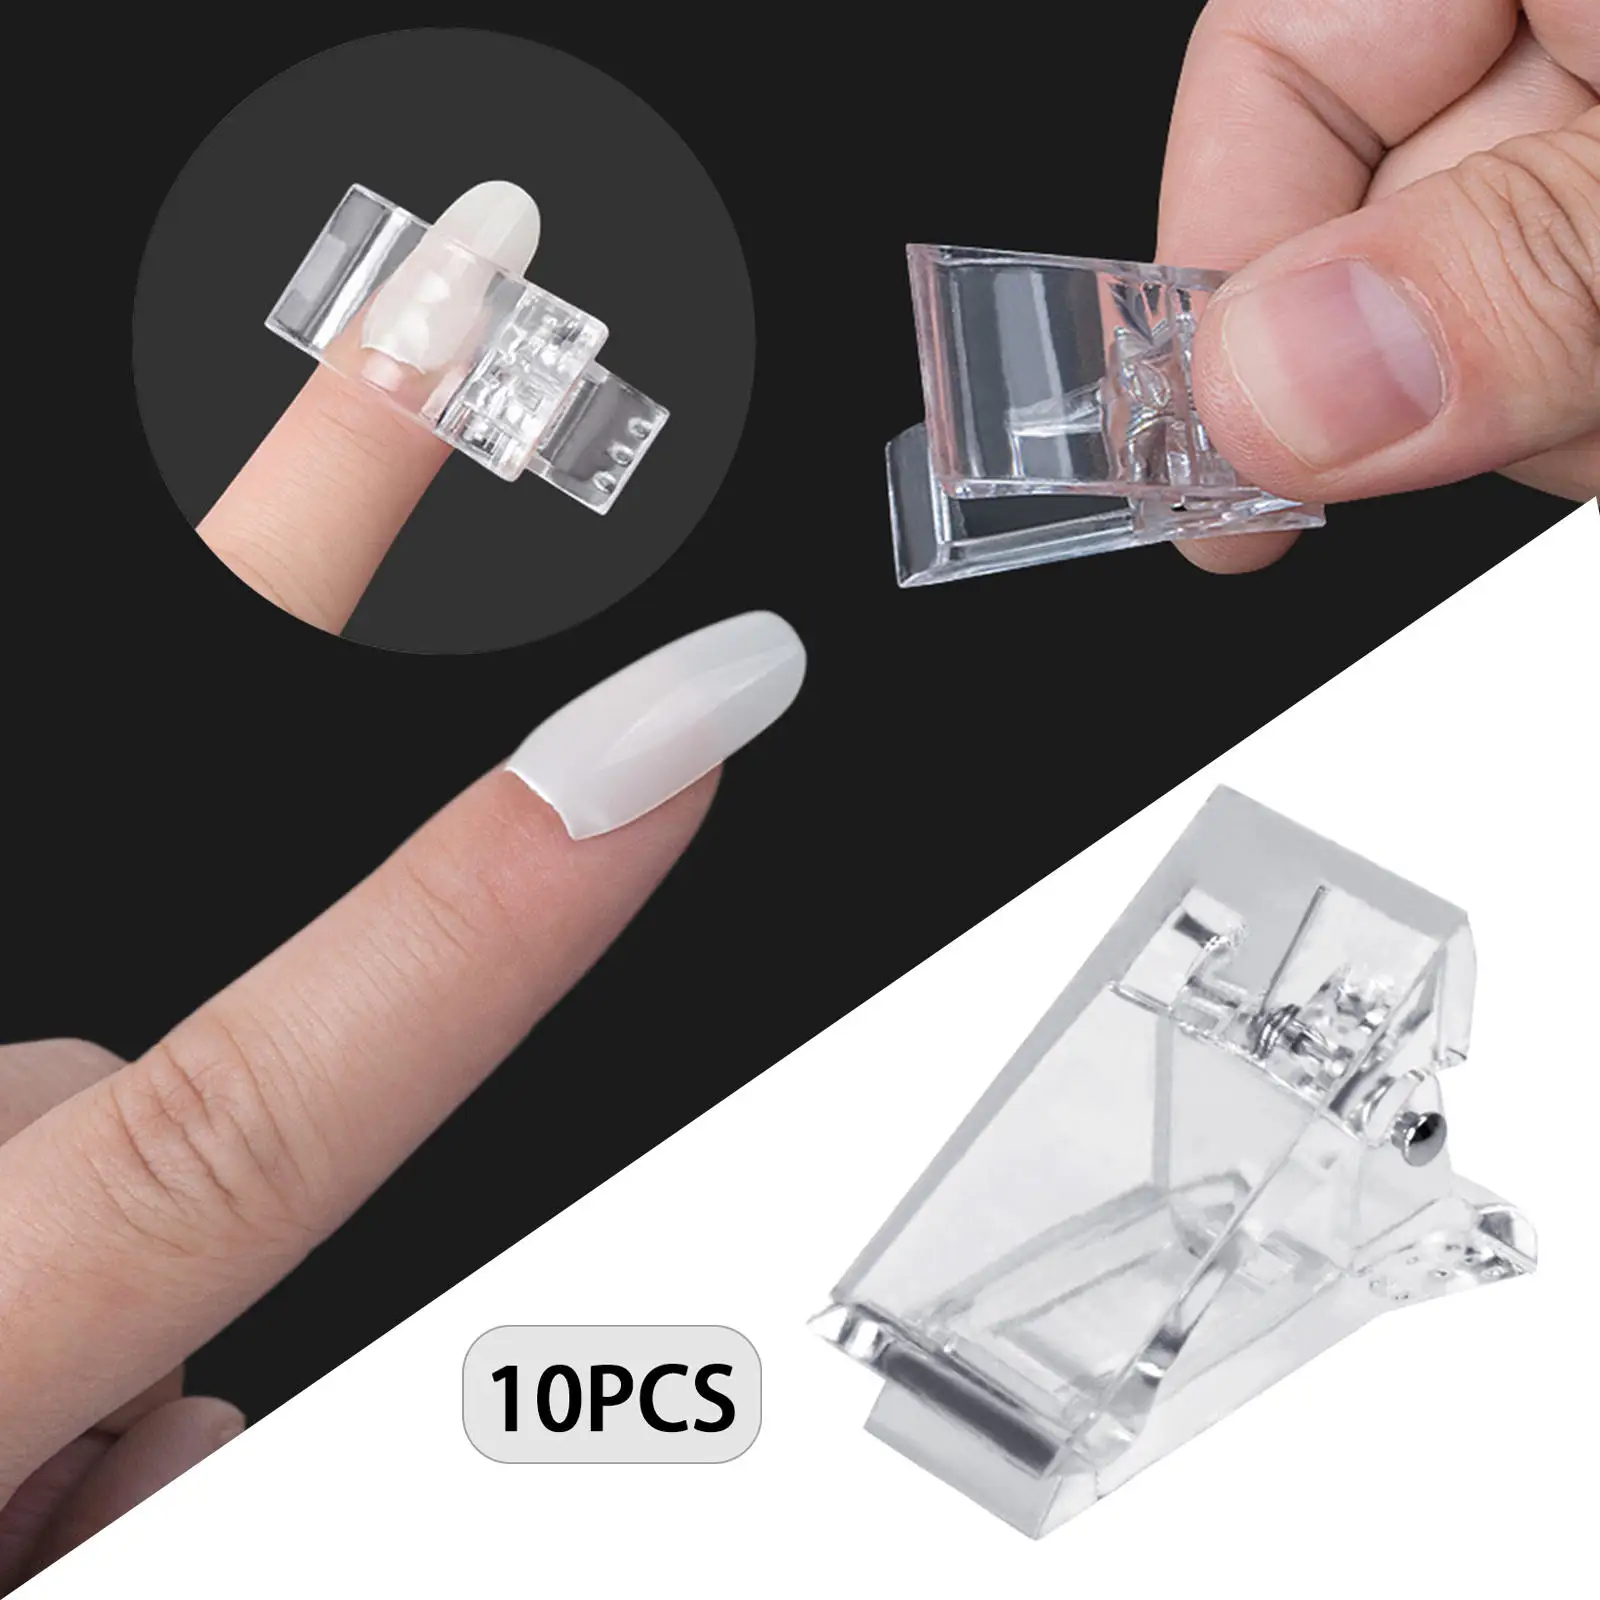 10x Poly Clamp Nail Tips Clip Manicure Extension Clips Tool Clips Gel Quick Building Set Transparent for Salon Home Use